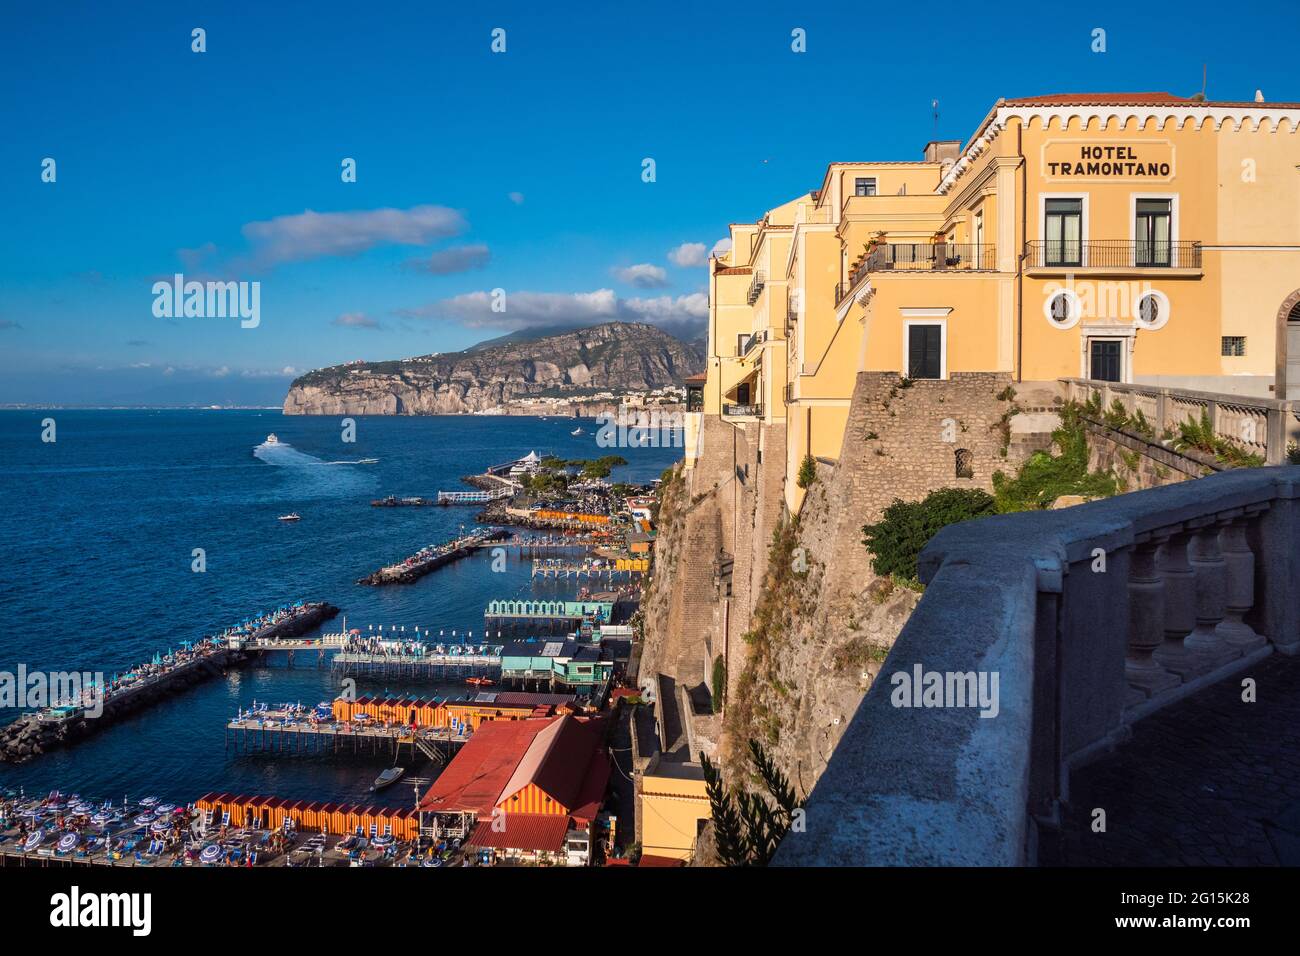 Sorrento, Campania, Italy - August 26 2020: Hotel Tramontano, in the Villa Strongoli Palace on the Cliff overlooking the Bay of Naples Stock Photo